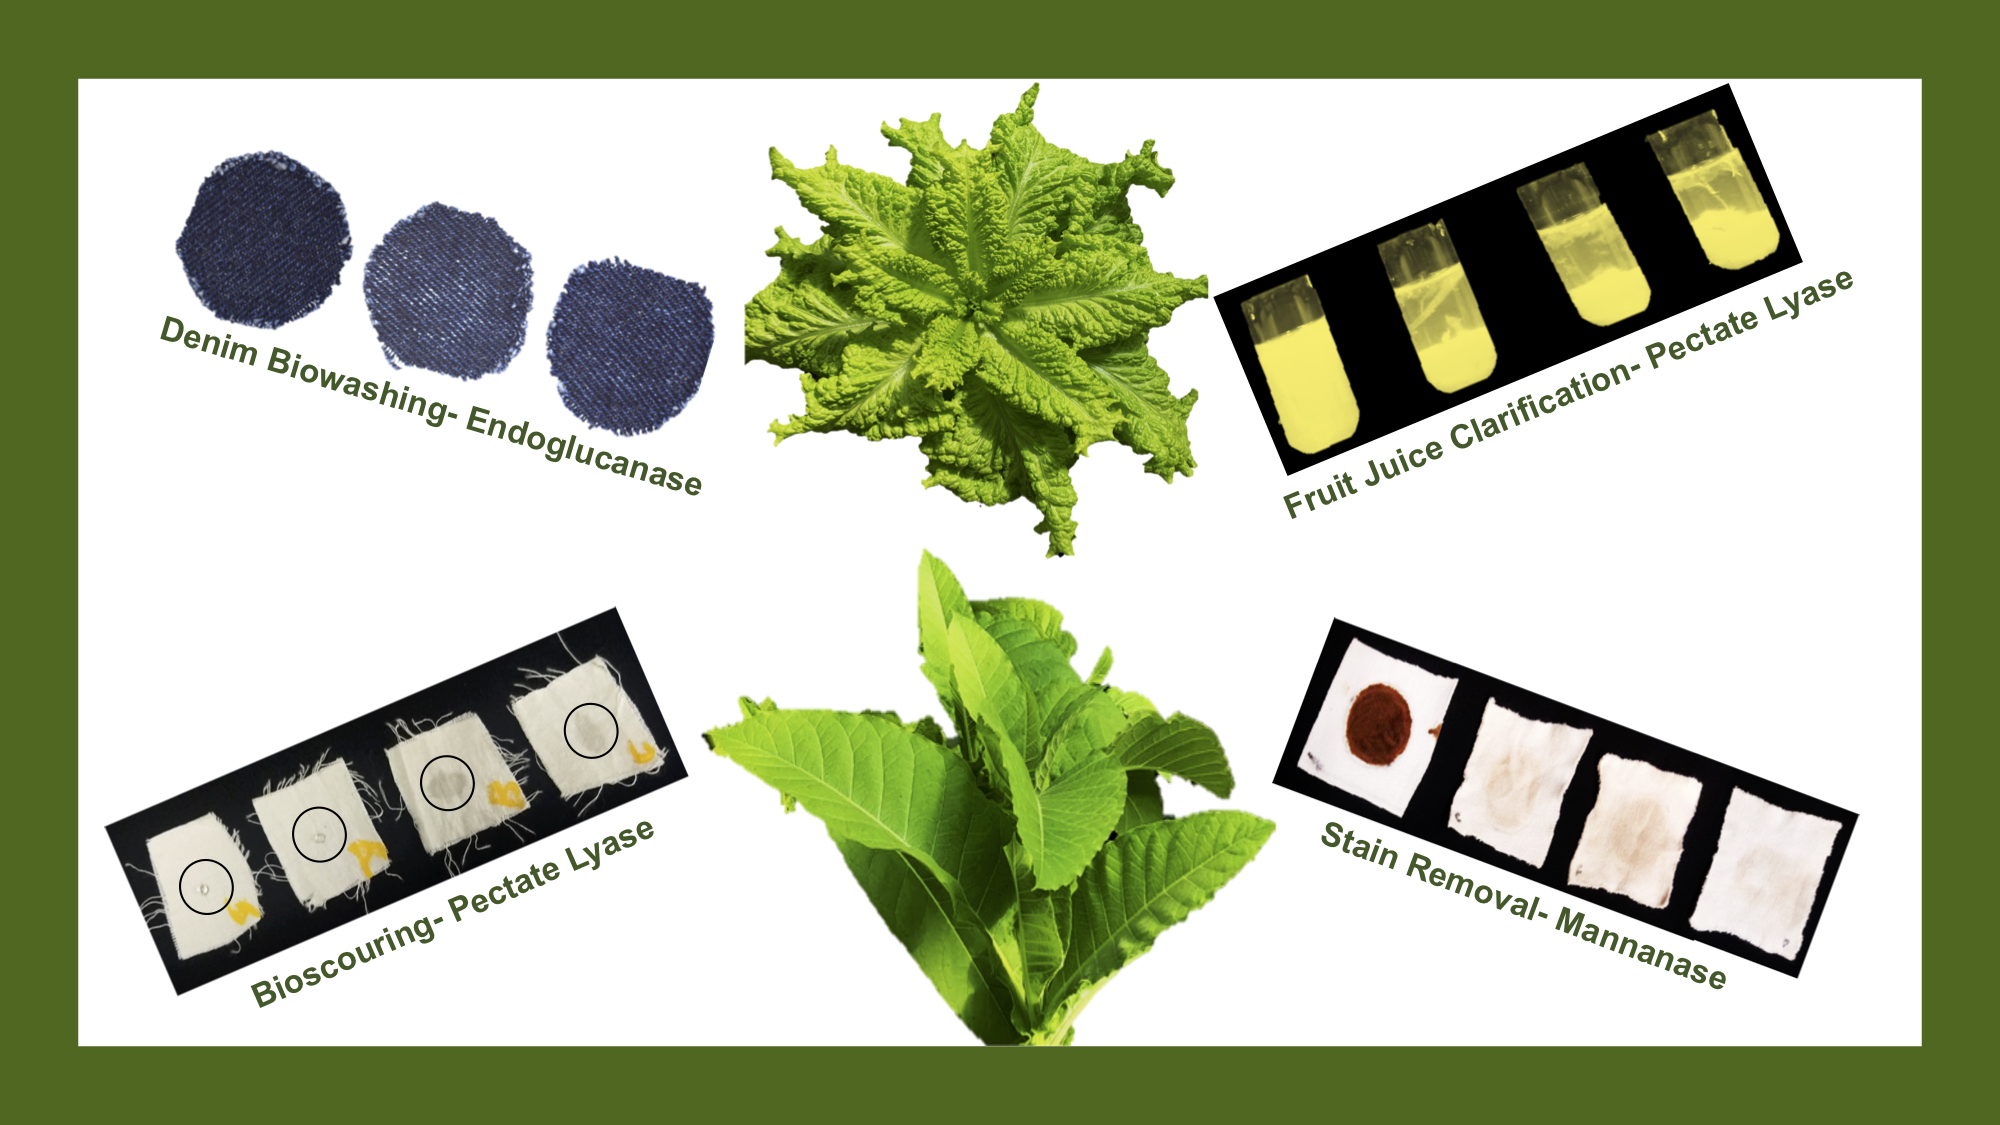 Plant leaves from two different species are surrounded by images of four different applications: denim biowashing - endoglucanase, bioscouring - pectate lyase, fruit juice clarification - pectate lyase, and stain removal - mannanase. 